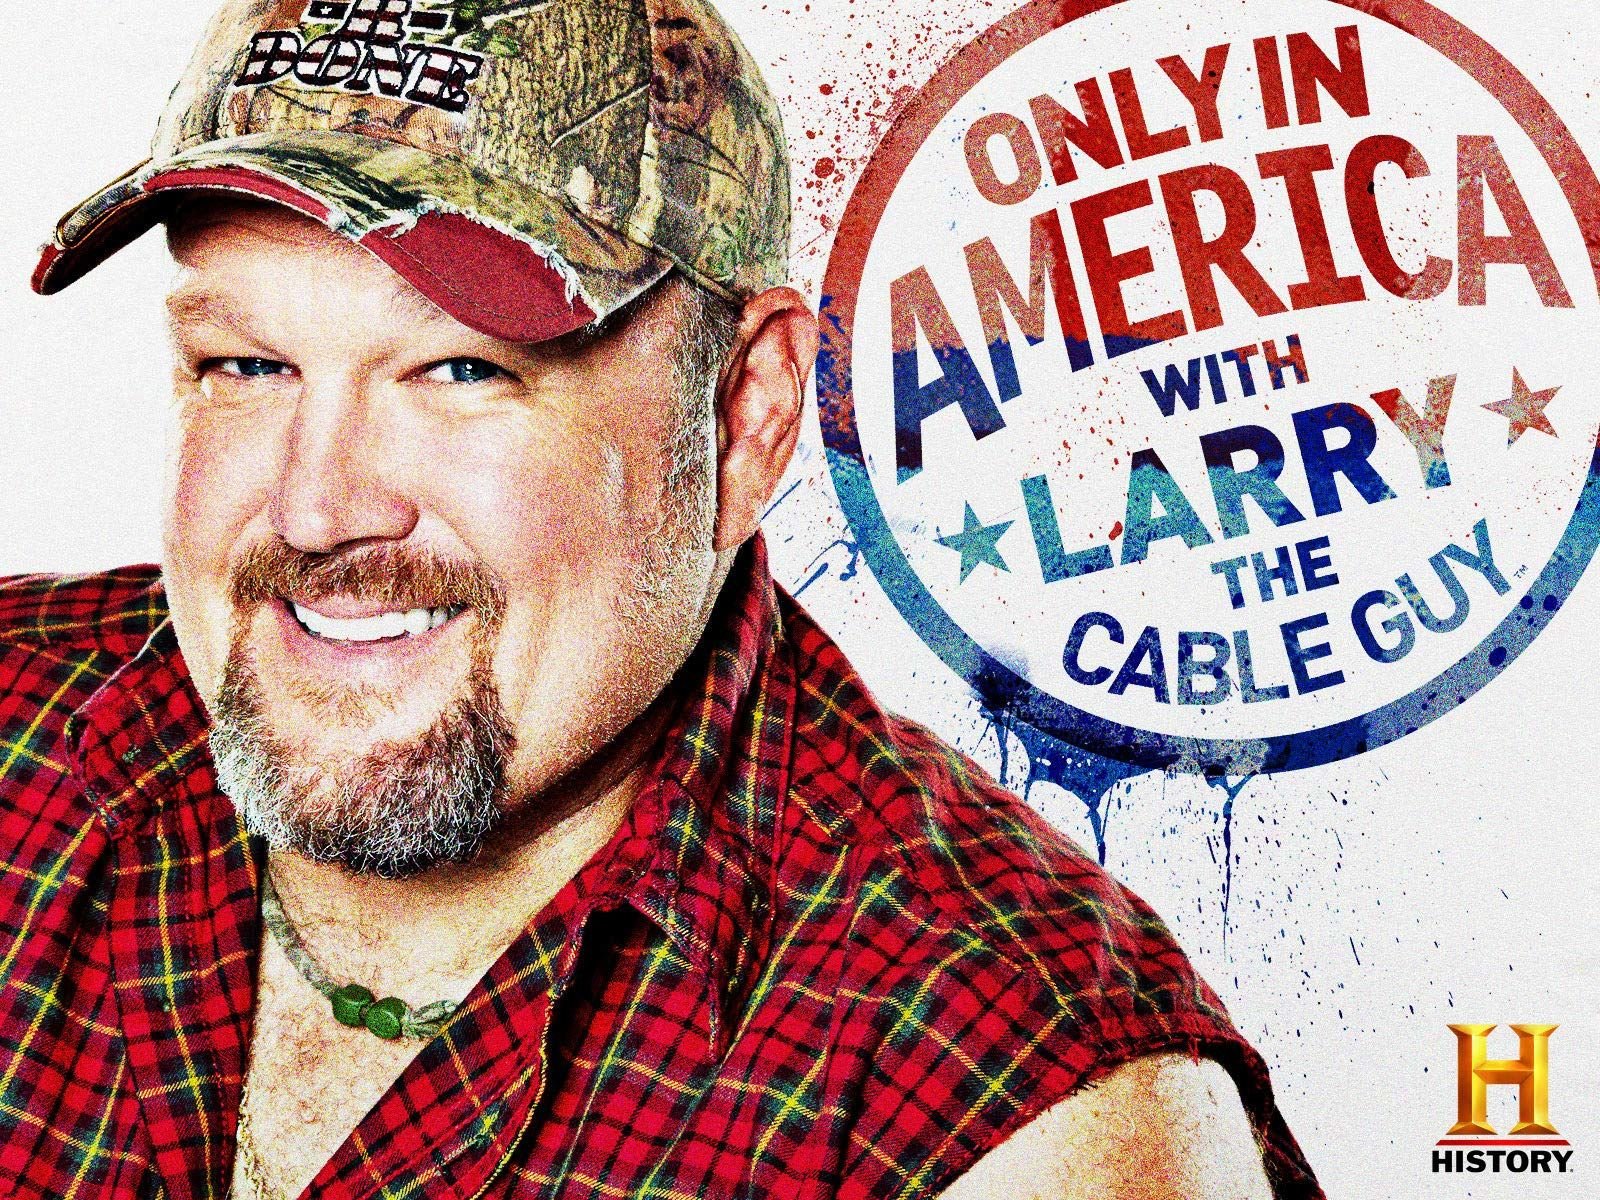 Watch Only in America with Larry the Cable Guy.